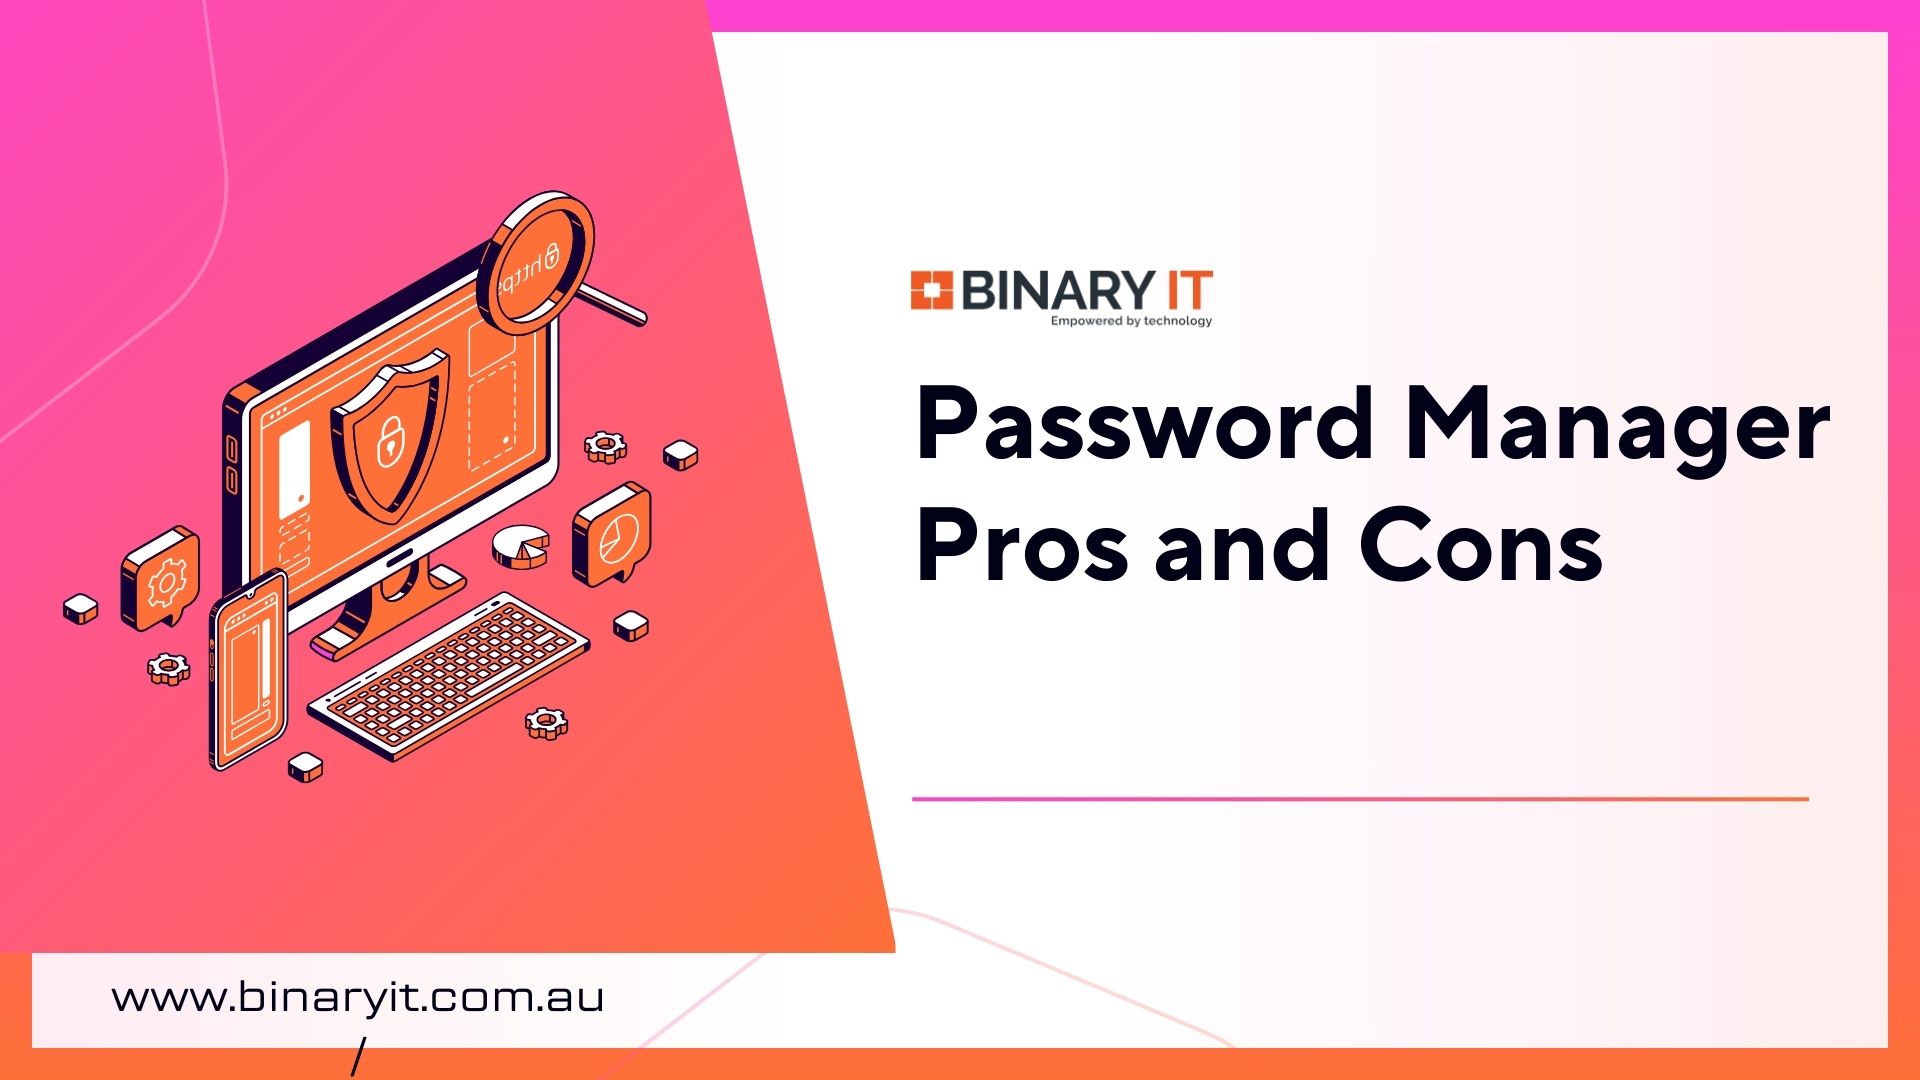 Password Manager Pros and Cons